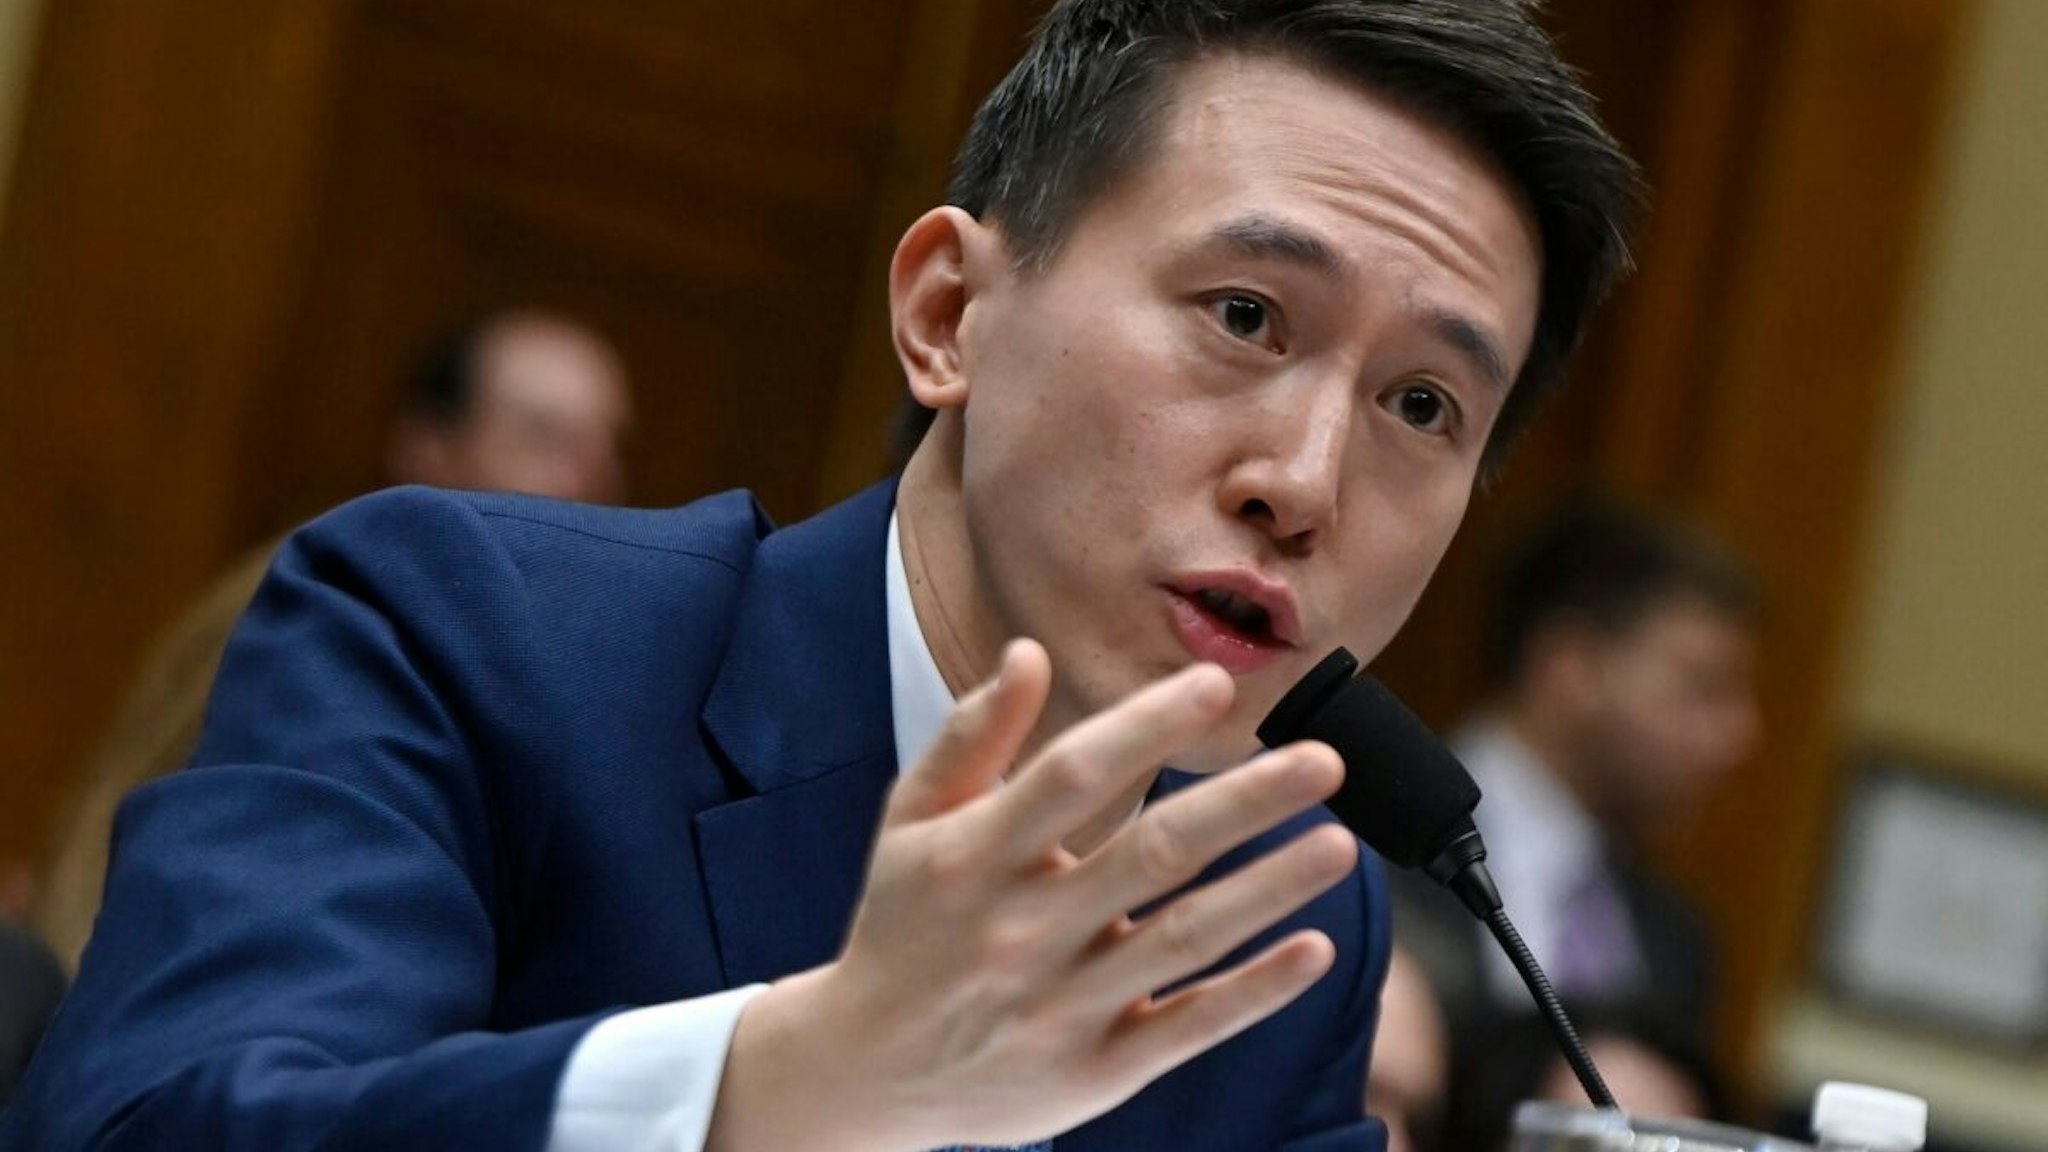 TikTok CEO Shou Zi Chew testifies before the House Energy and Commerce Committee hearing on "TikTok: How Congress Can Safeguard American Data Privacy and Protect Children from Online Harms," on Capitol Hill, March 23, 2023, in Washington, DC.